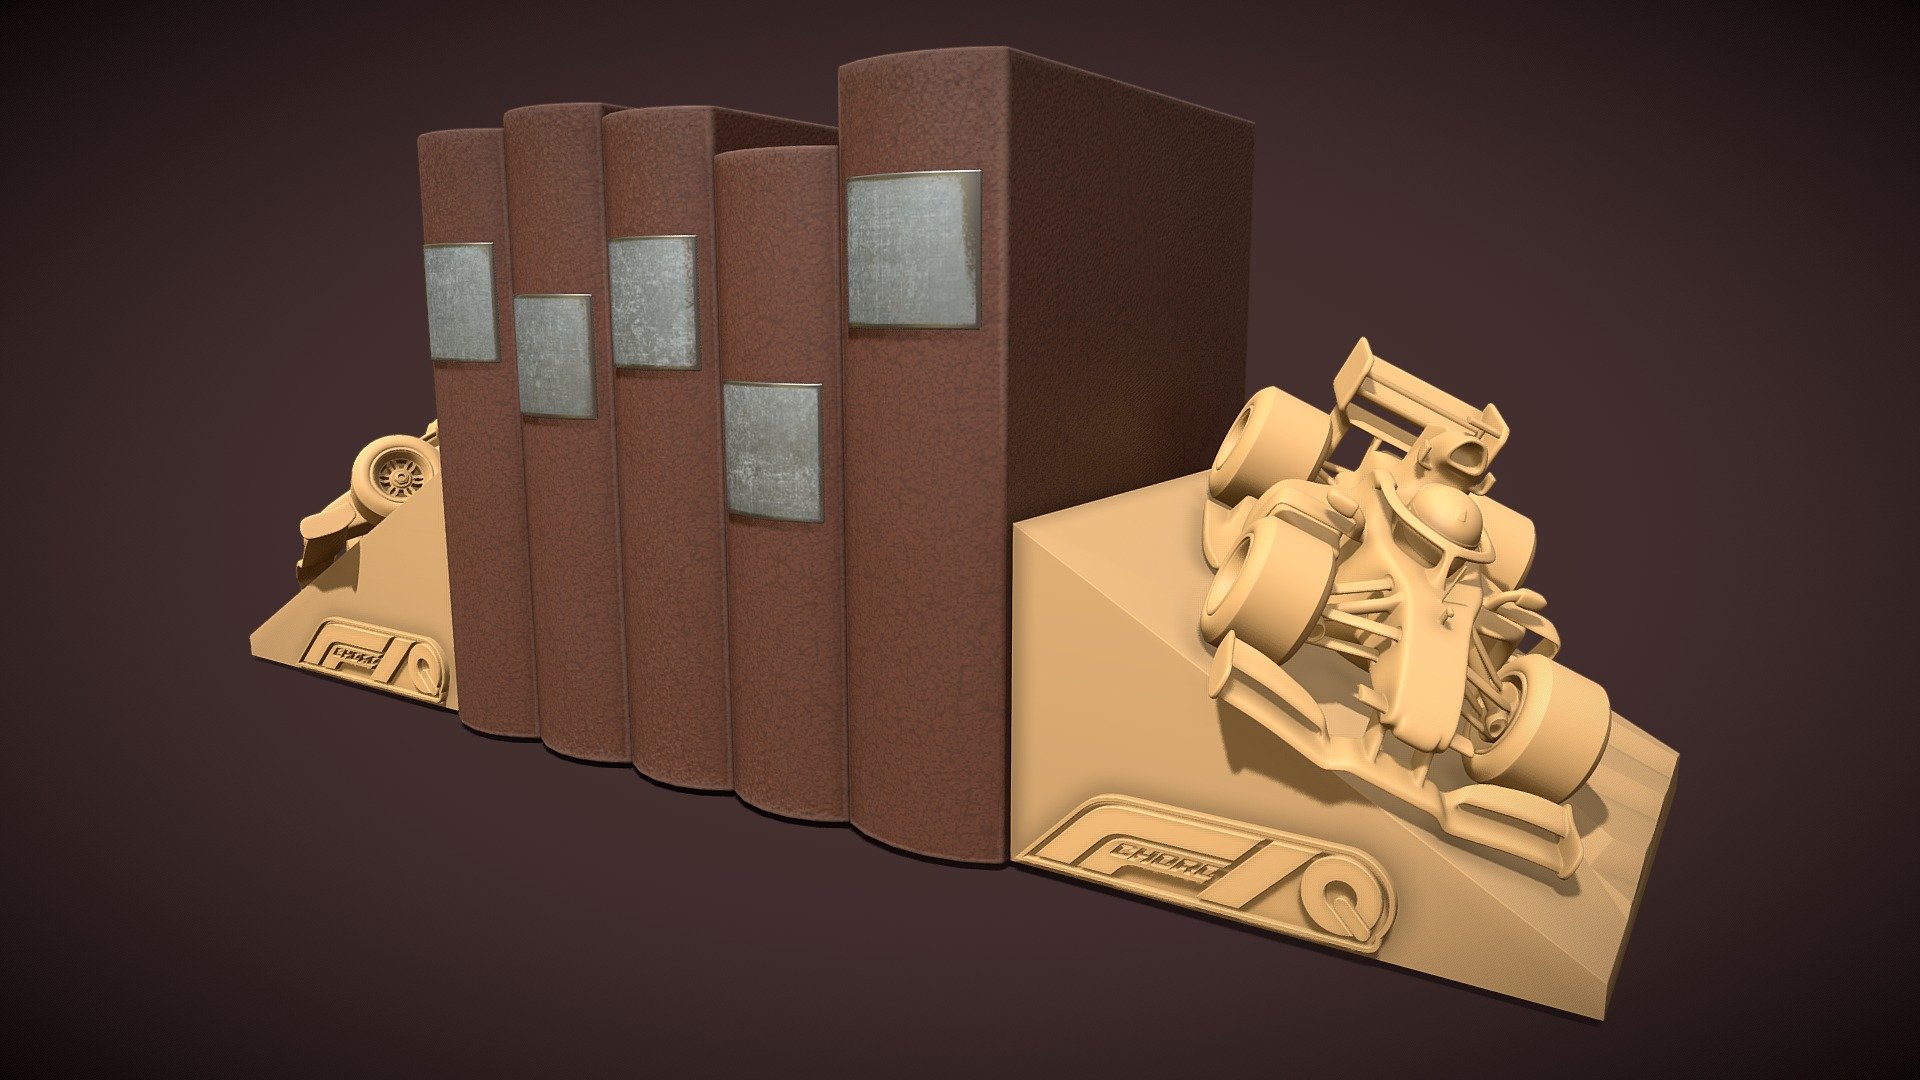 Choro-Q style F1 car bookends, model ready to be 3d printed 3d model